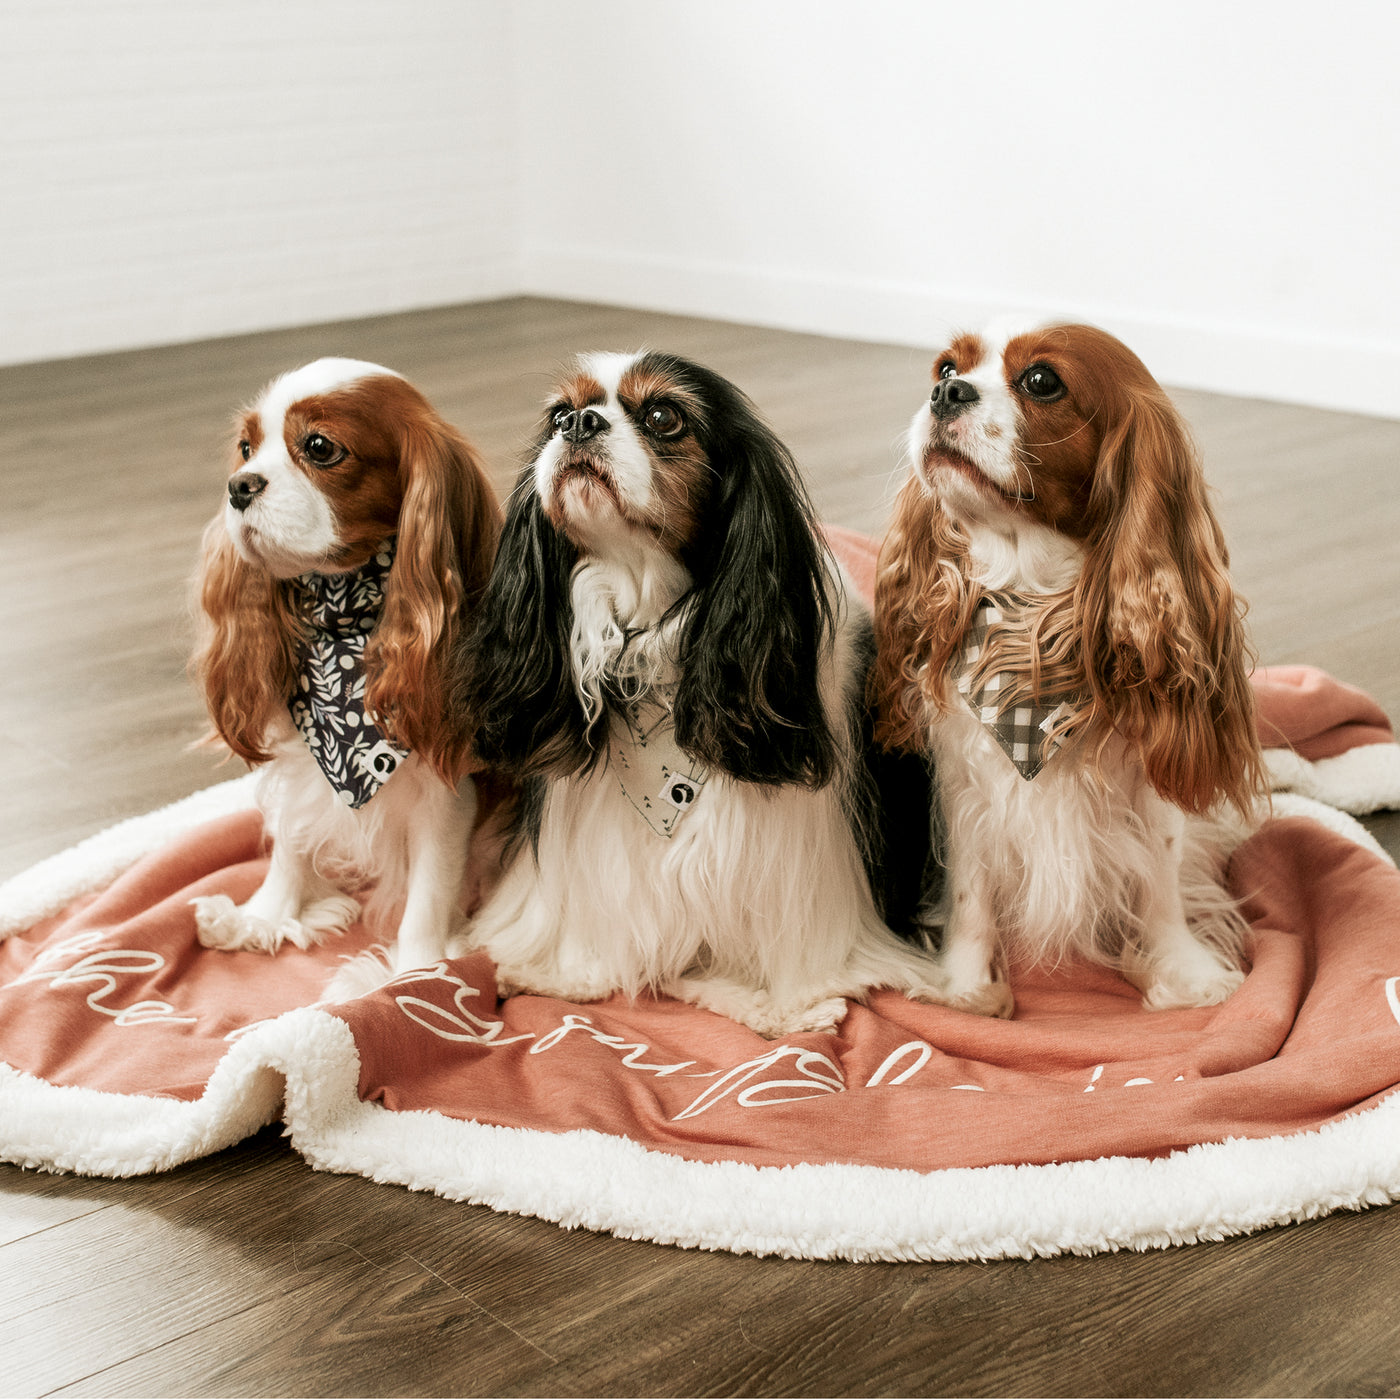 3 Cavalier King Charles Spaniels sitting on a pink dog blanket